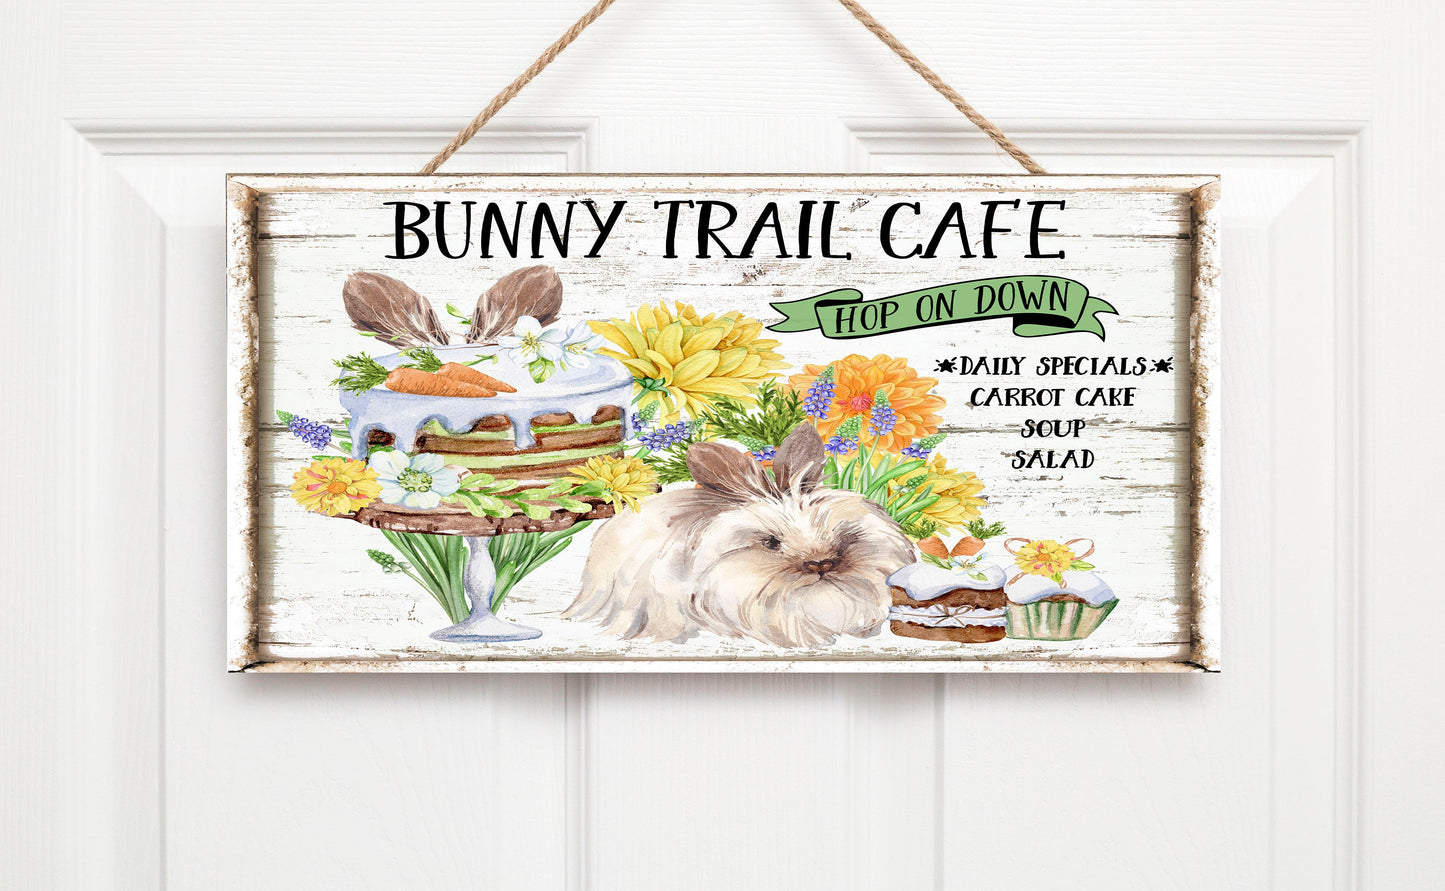 The Bunny Trial Cafe Printed Handmade Wood Sign